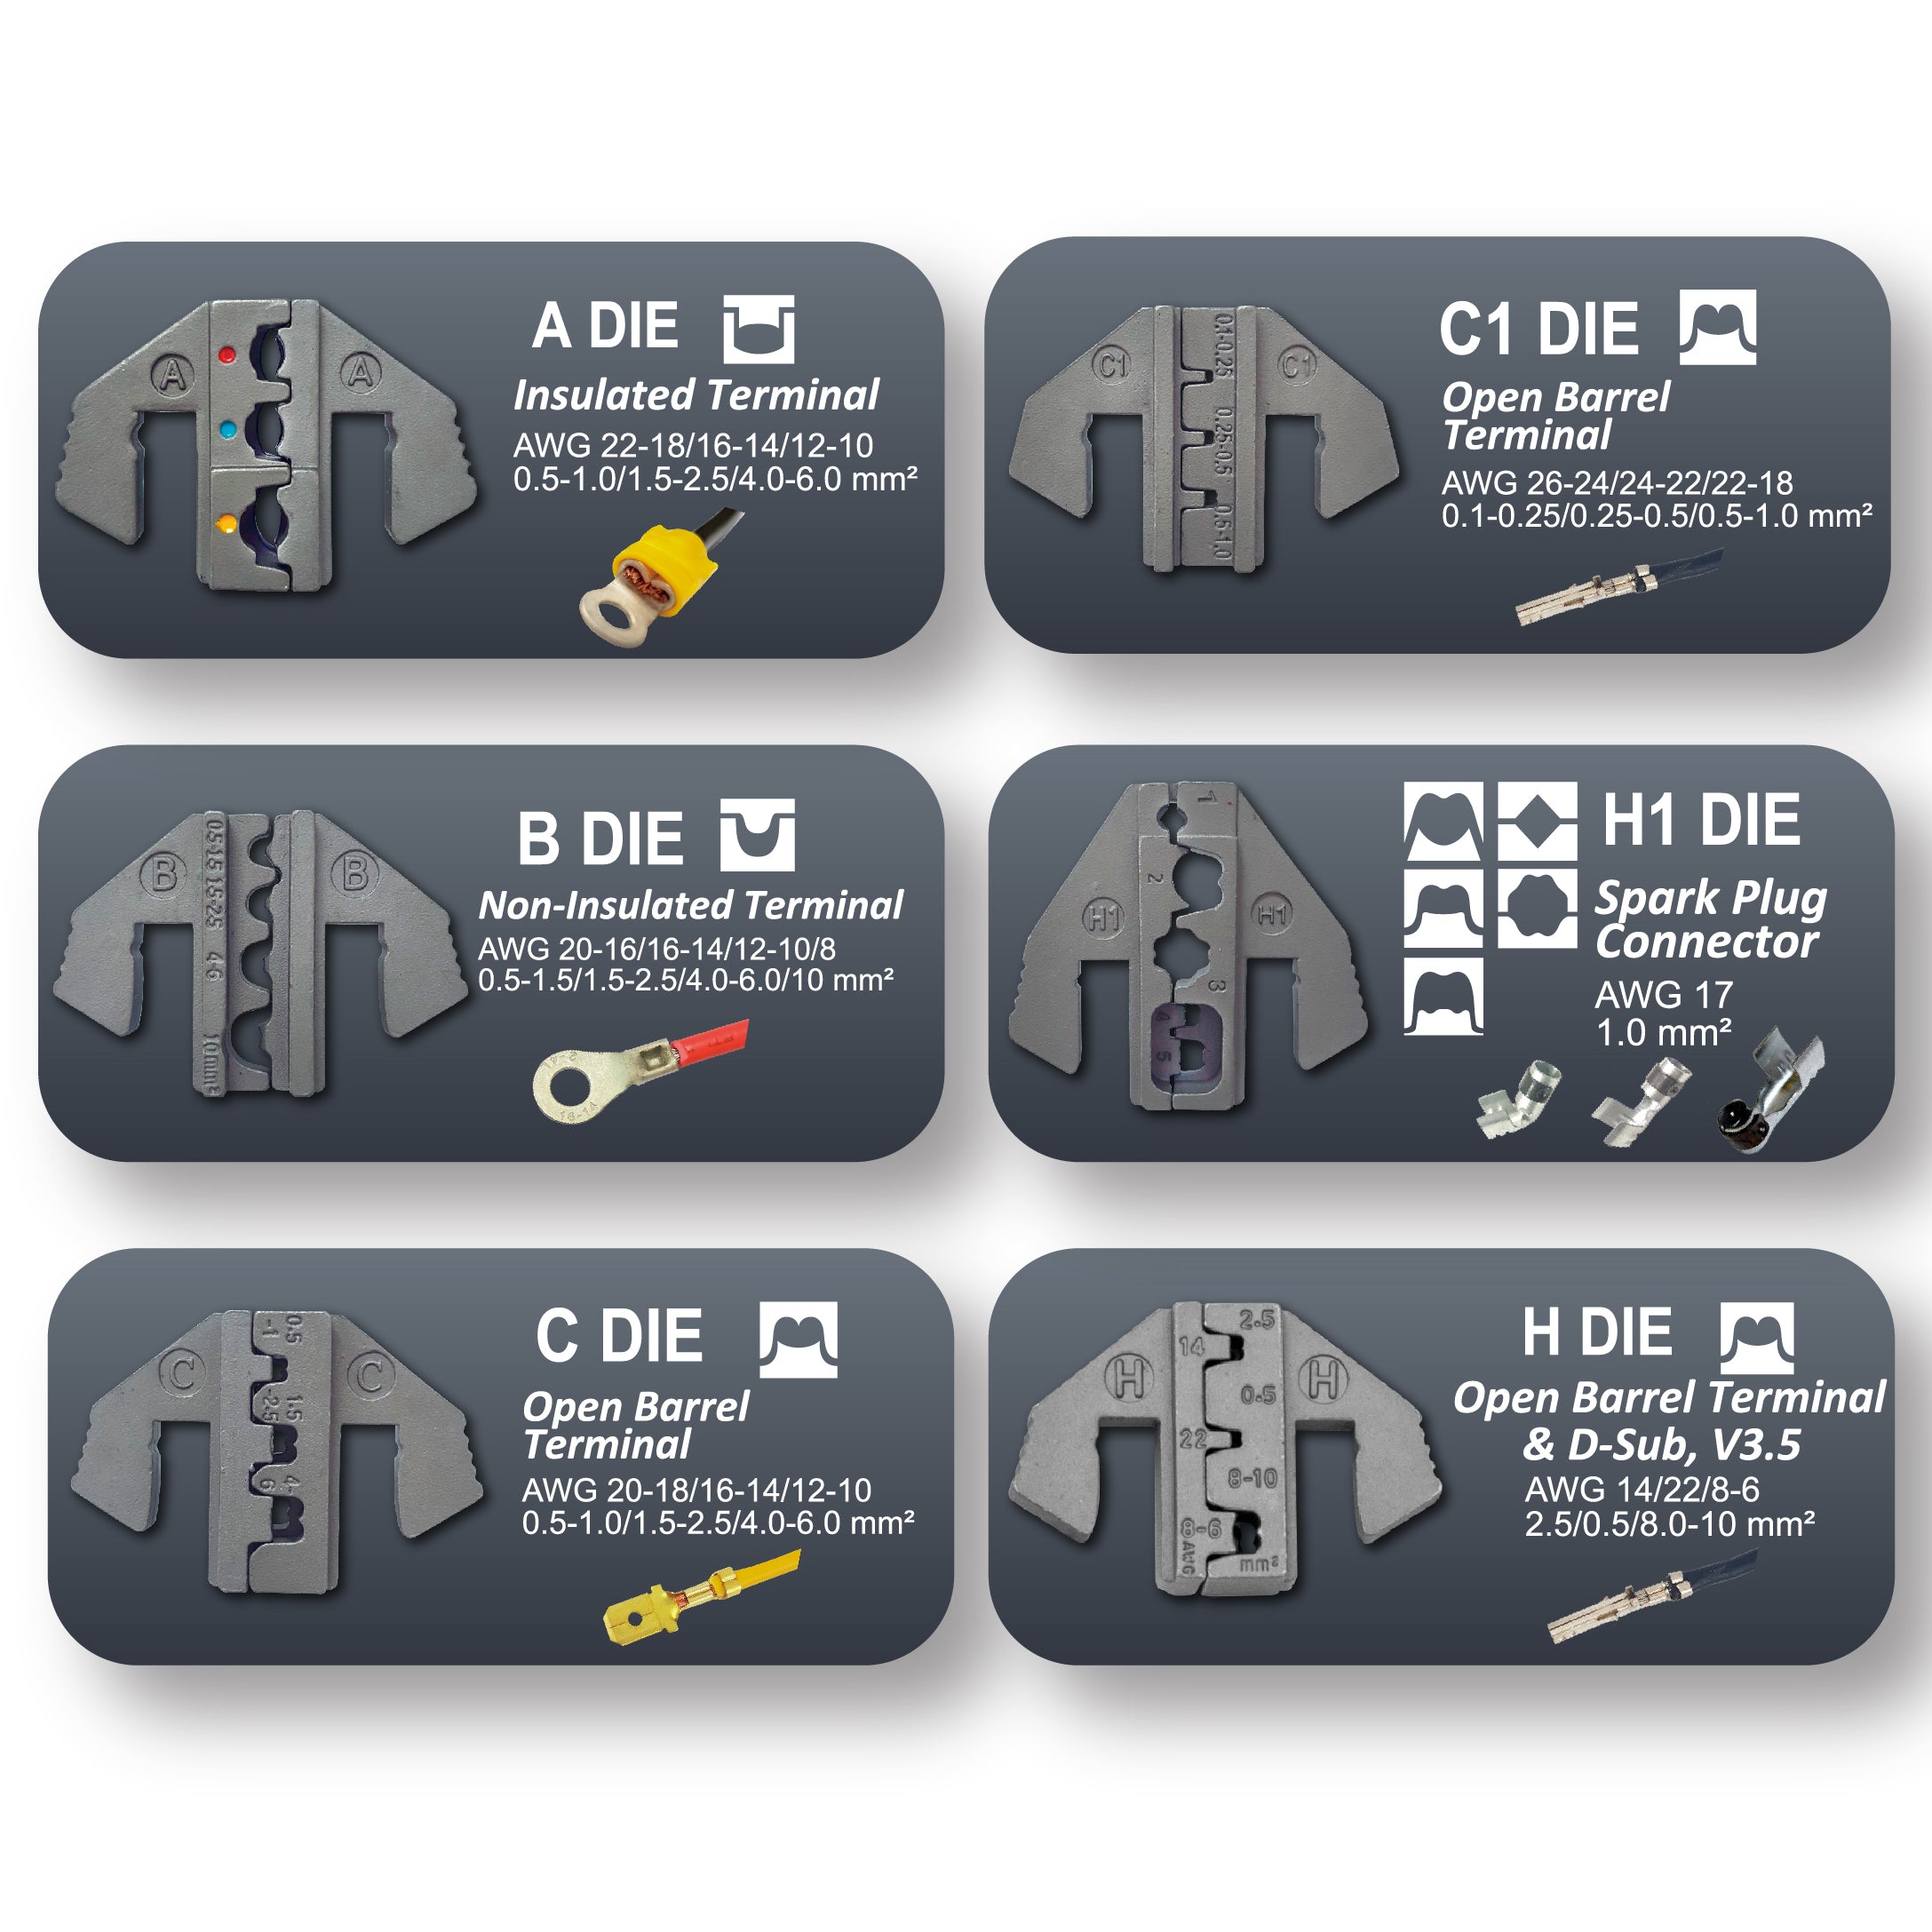 Crimping Tool Die Set - A, B, C, C1, H1, H Dies for Insulated, Non Insulated, Open Barrel & Spark Plug Terminals - Tool Guy Republic